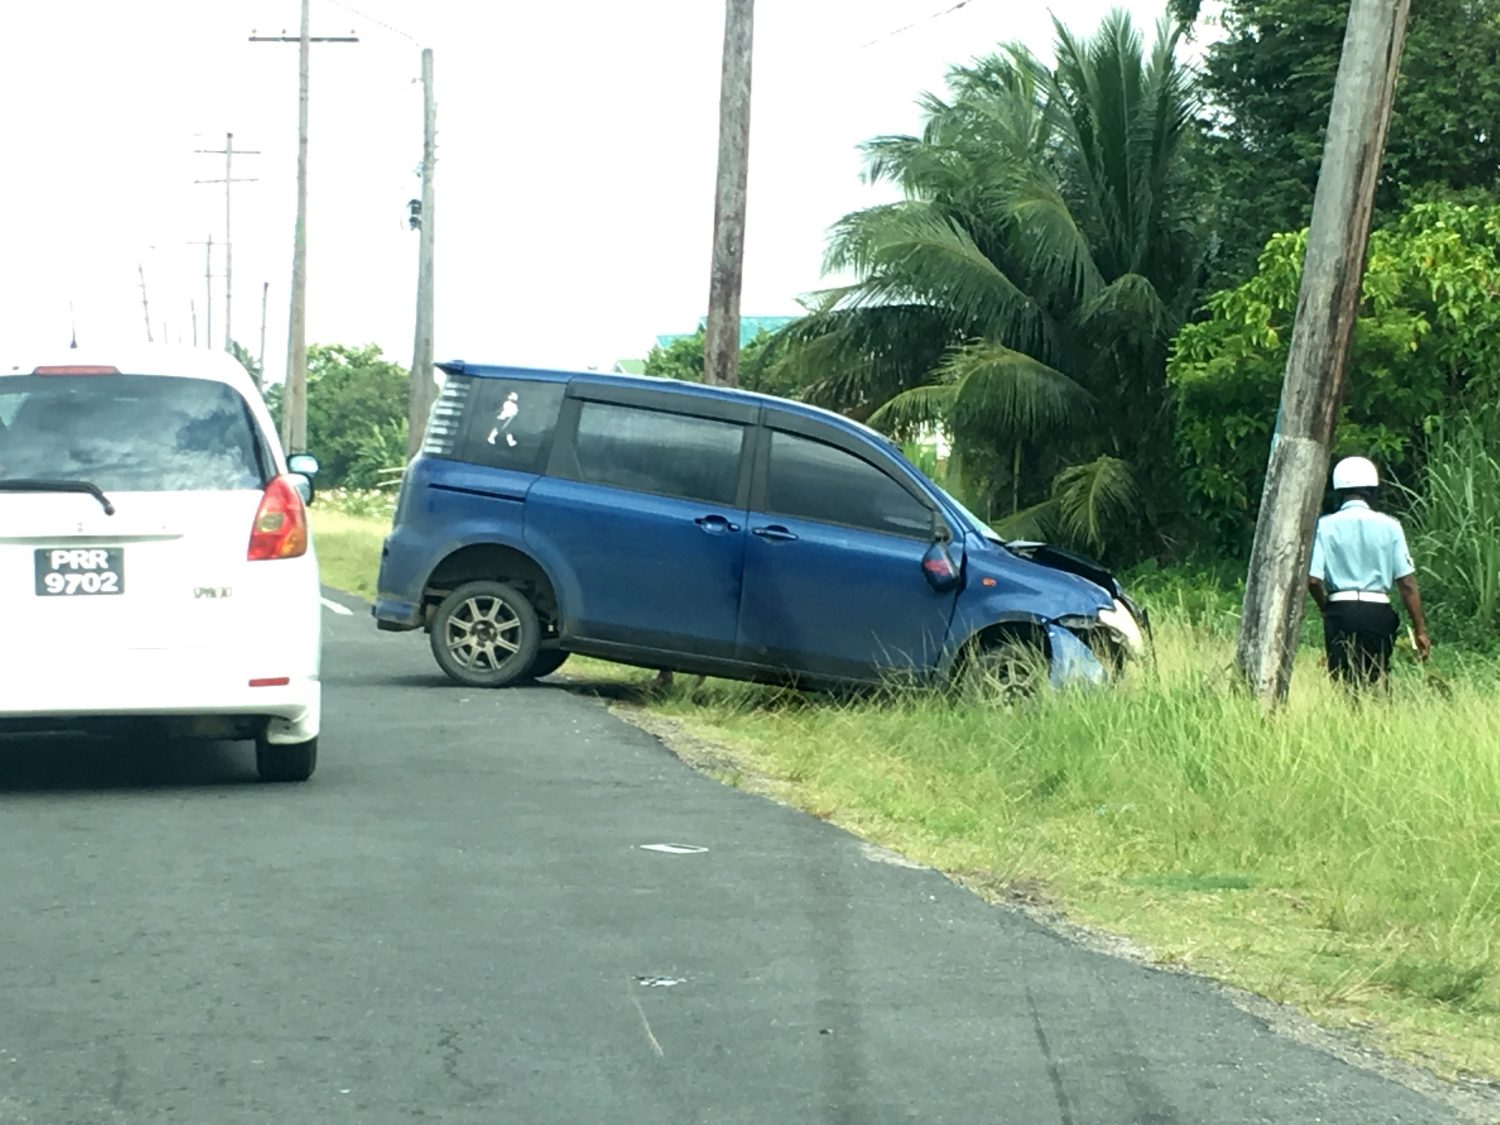 An early morning accident yesterday on the East Coast Railway Embankment as the driver of the vehicle at right was heading east which is not permitted between 7 am and 9 am.